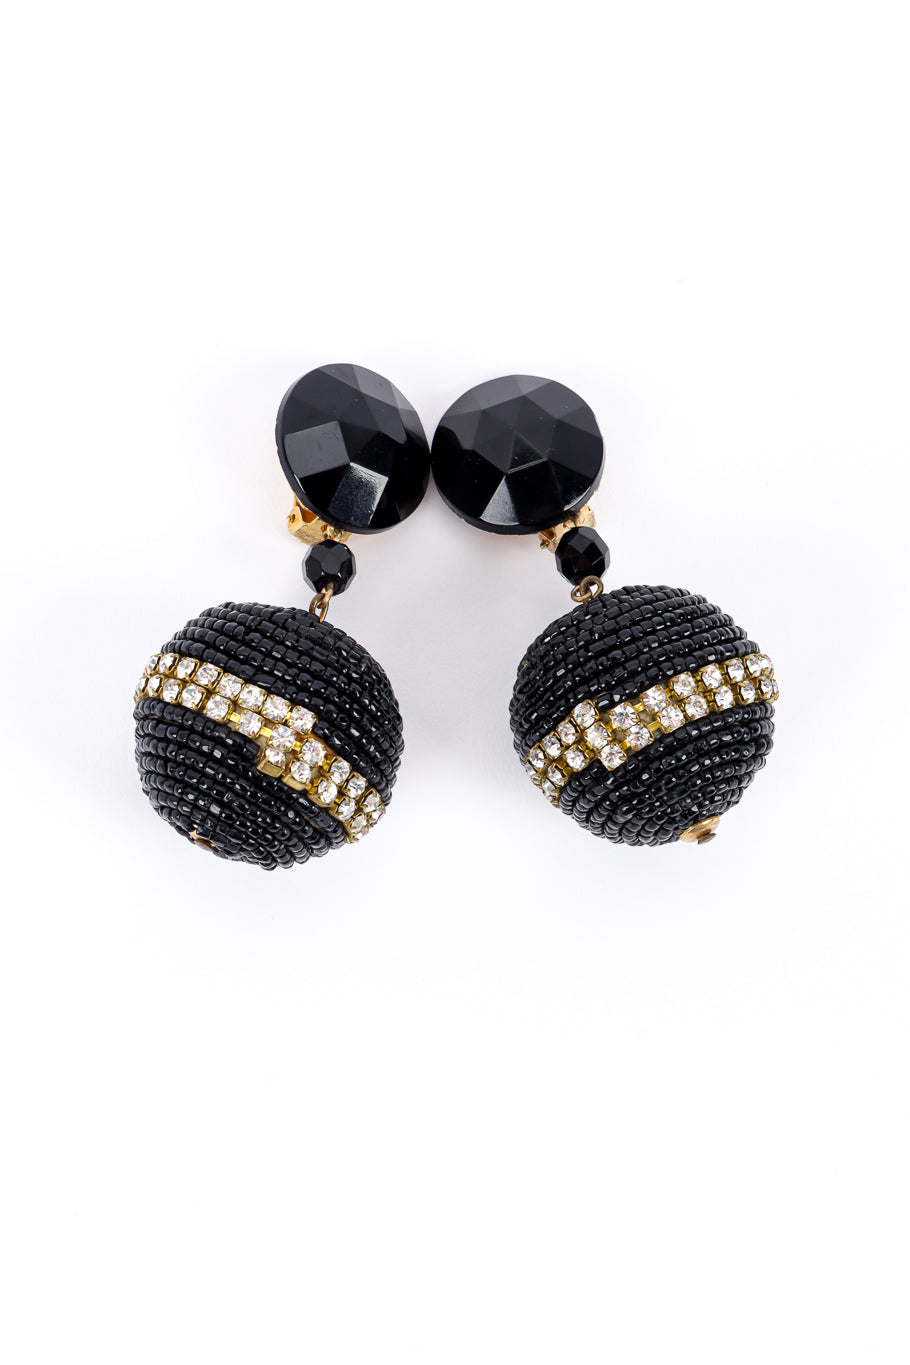 Crystal & Bead Ball Drop Earrings by Unger tops touching @recessla